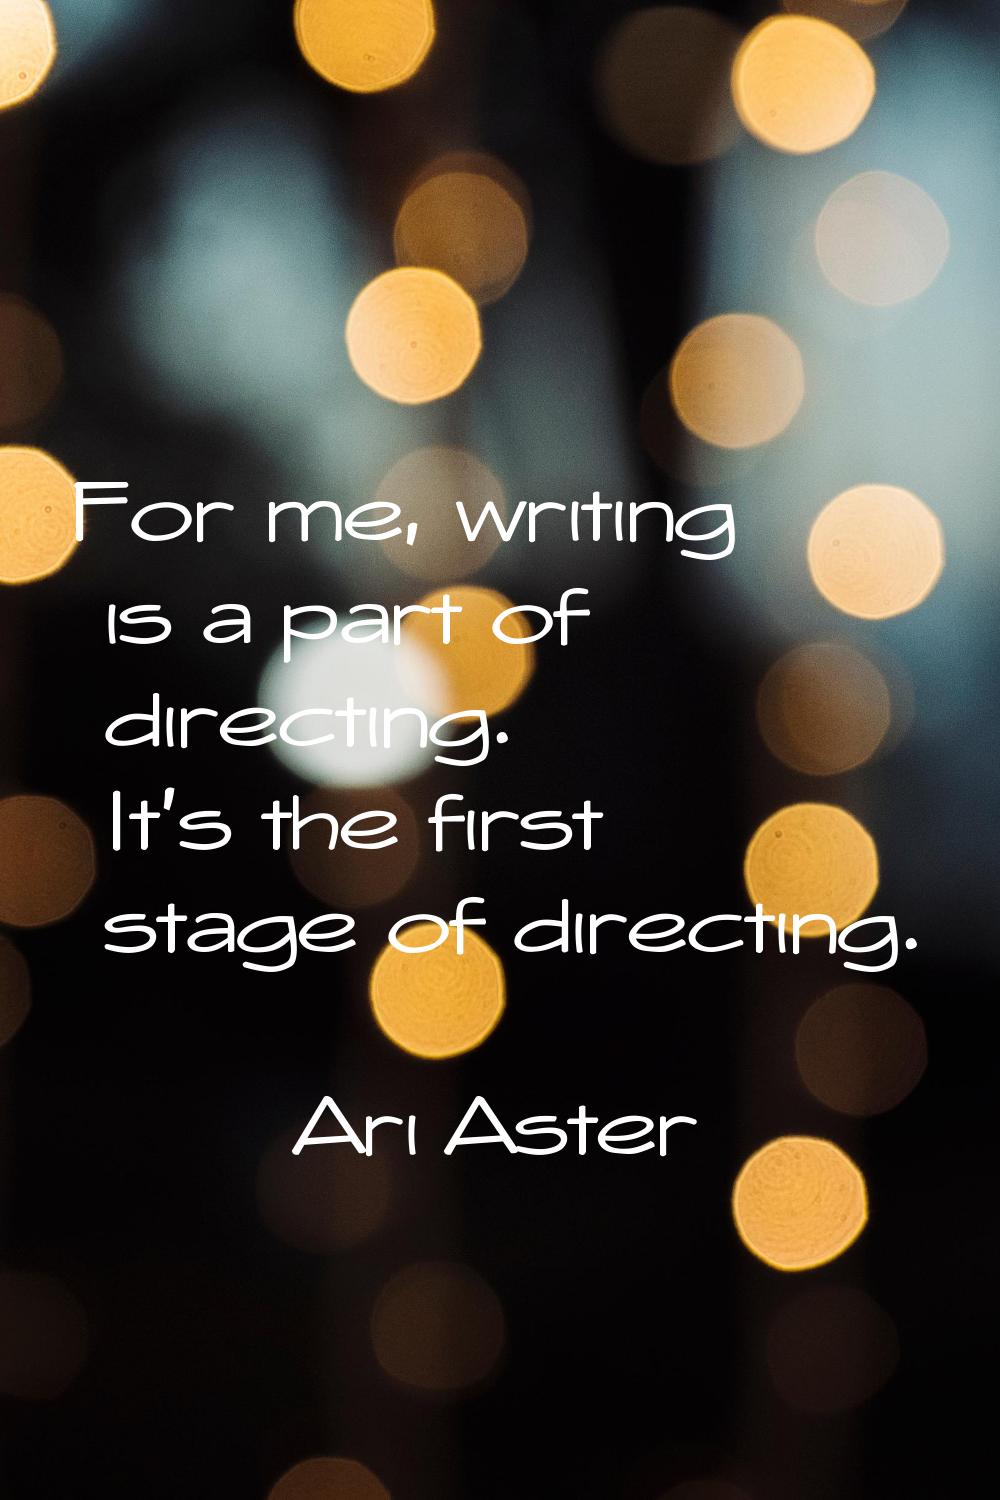 For me, writing is a part of directing. It's the first stage of directing.